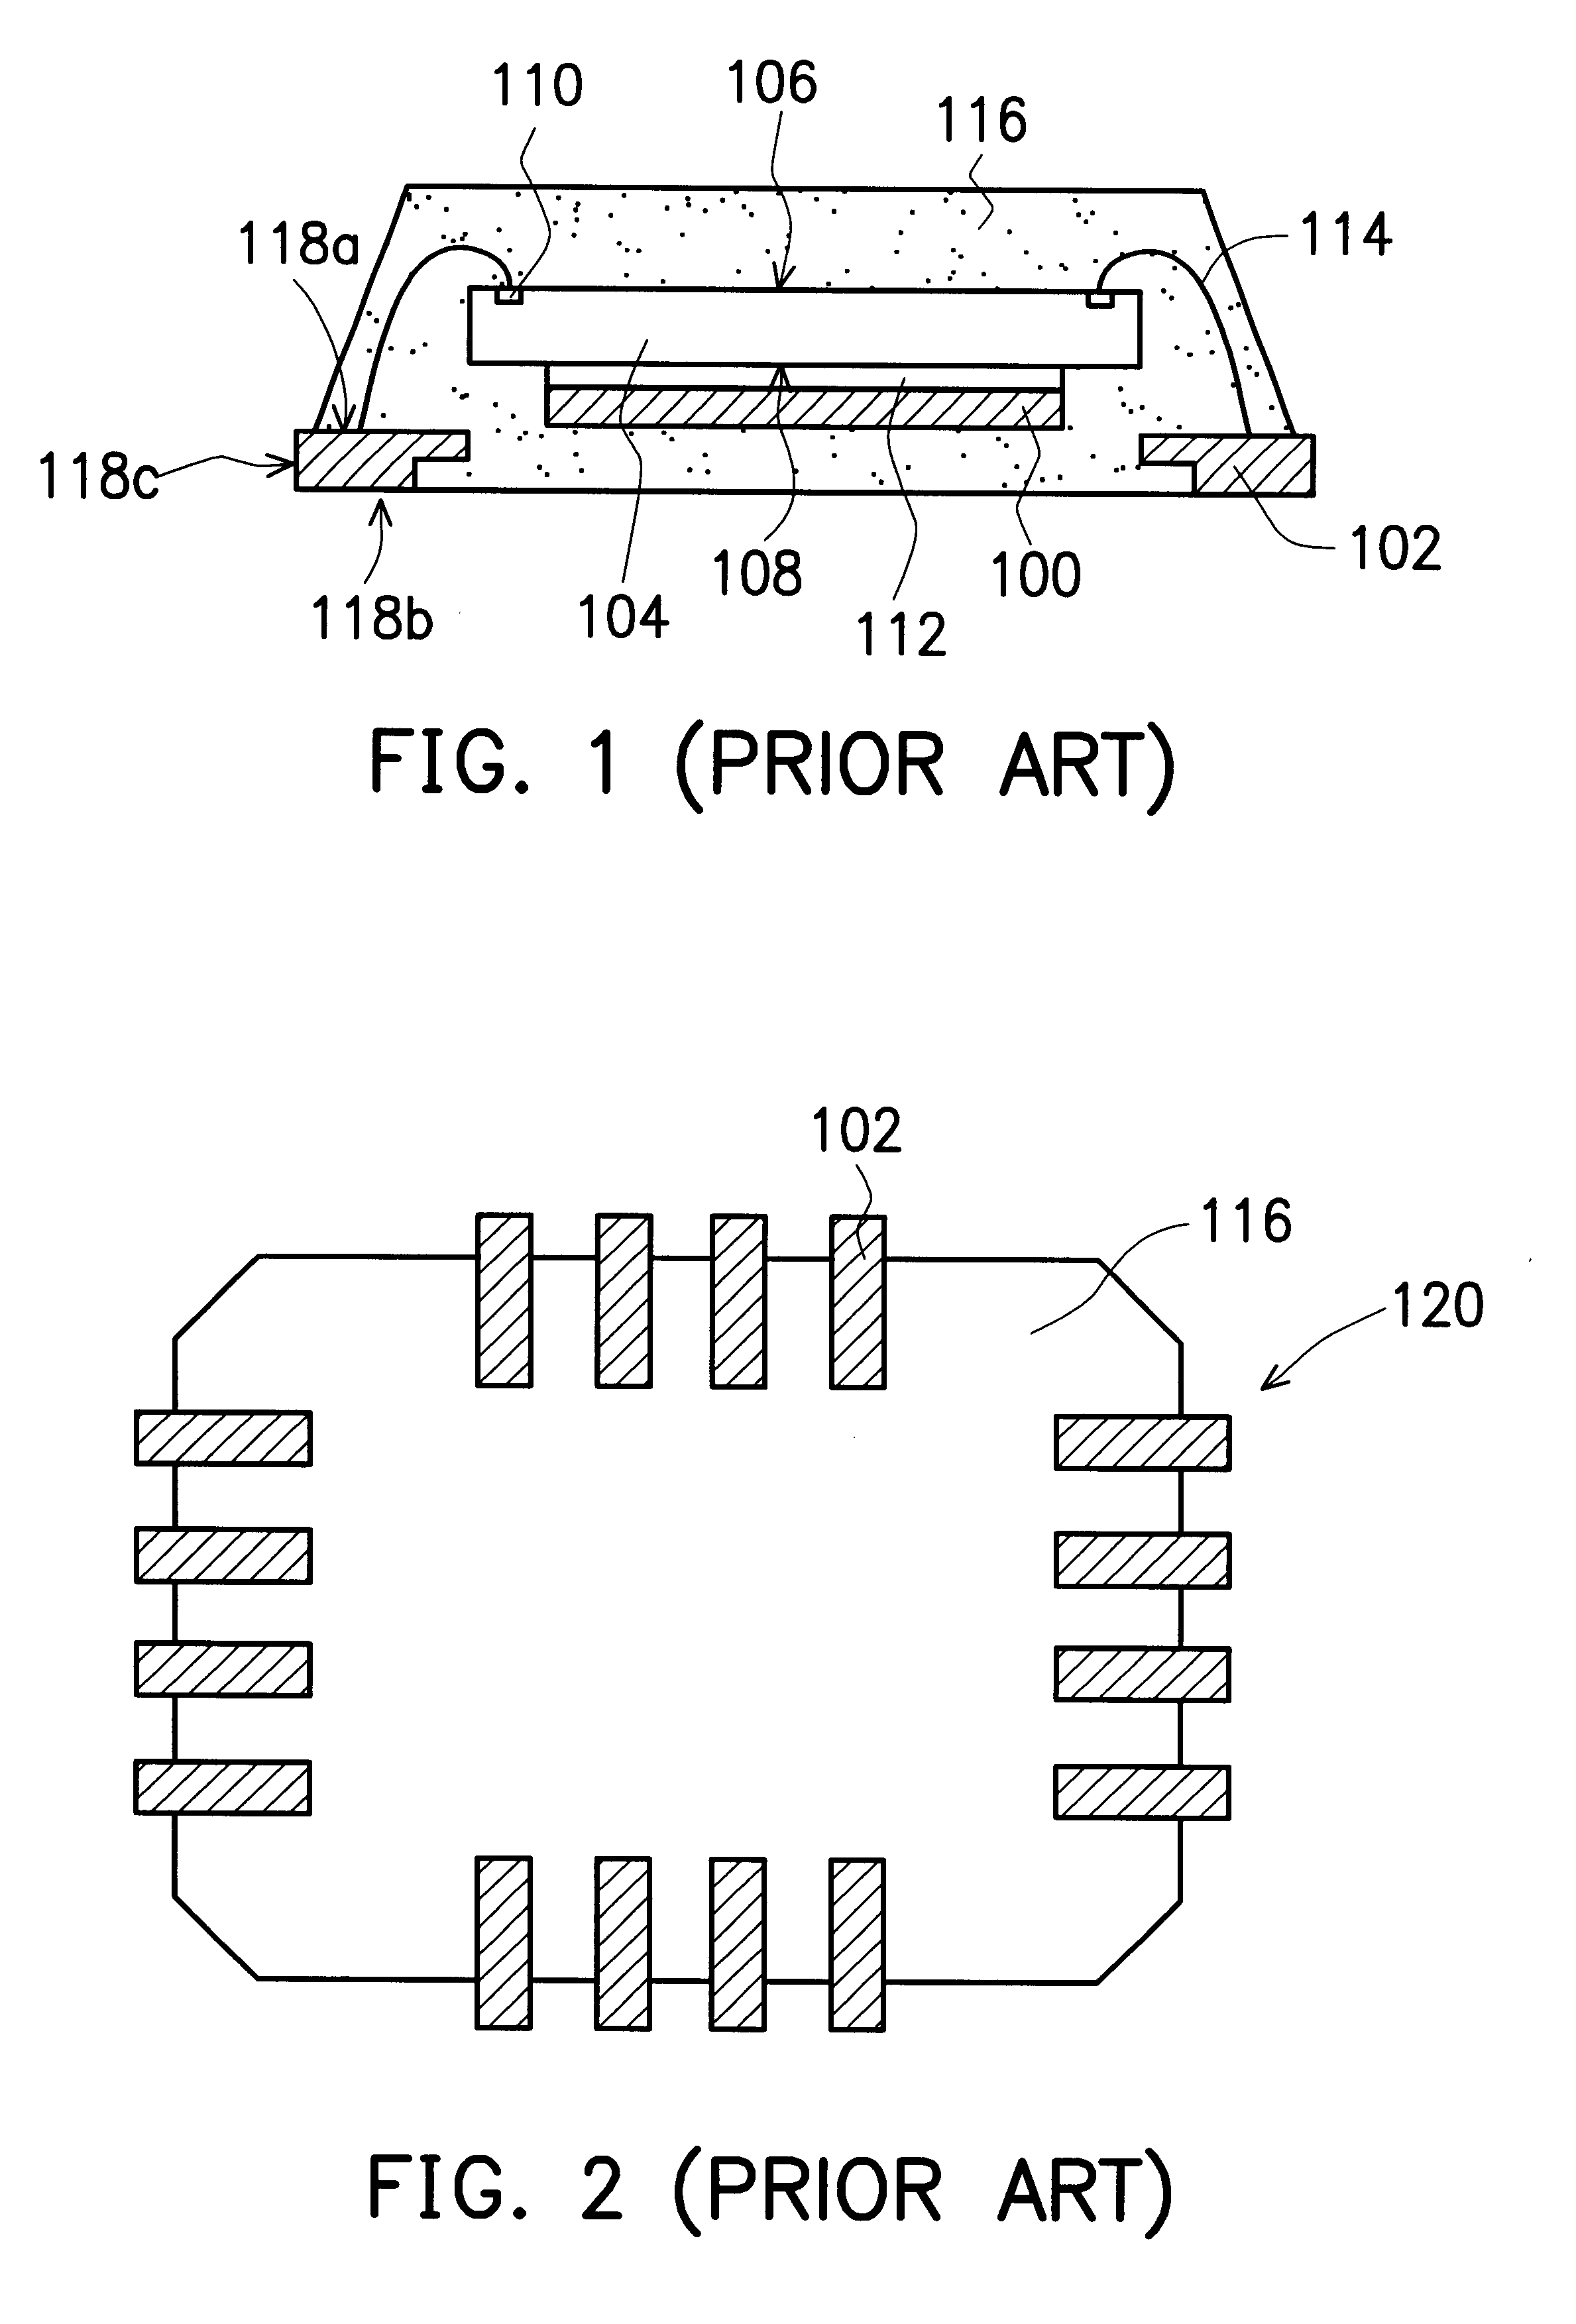 Universal lead frame type of quad flat non-lead package of semiconductor